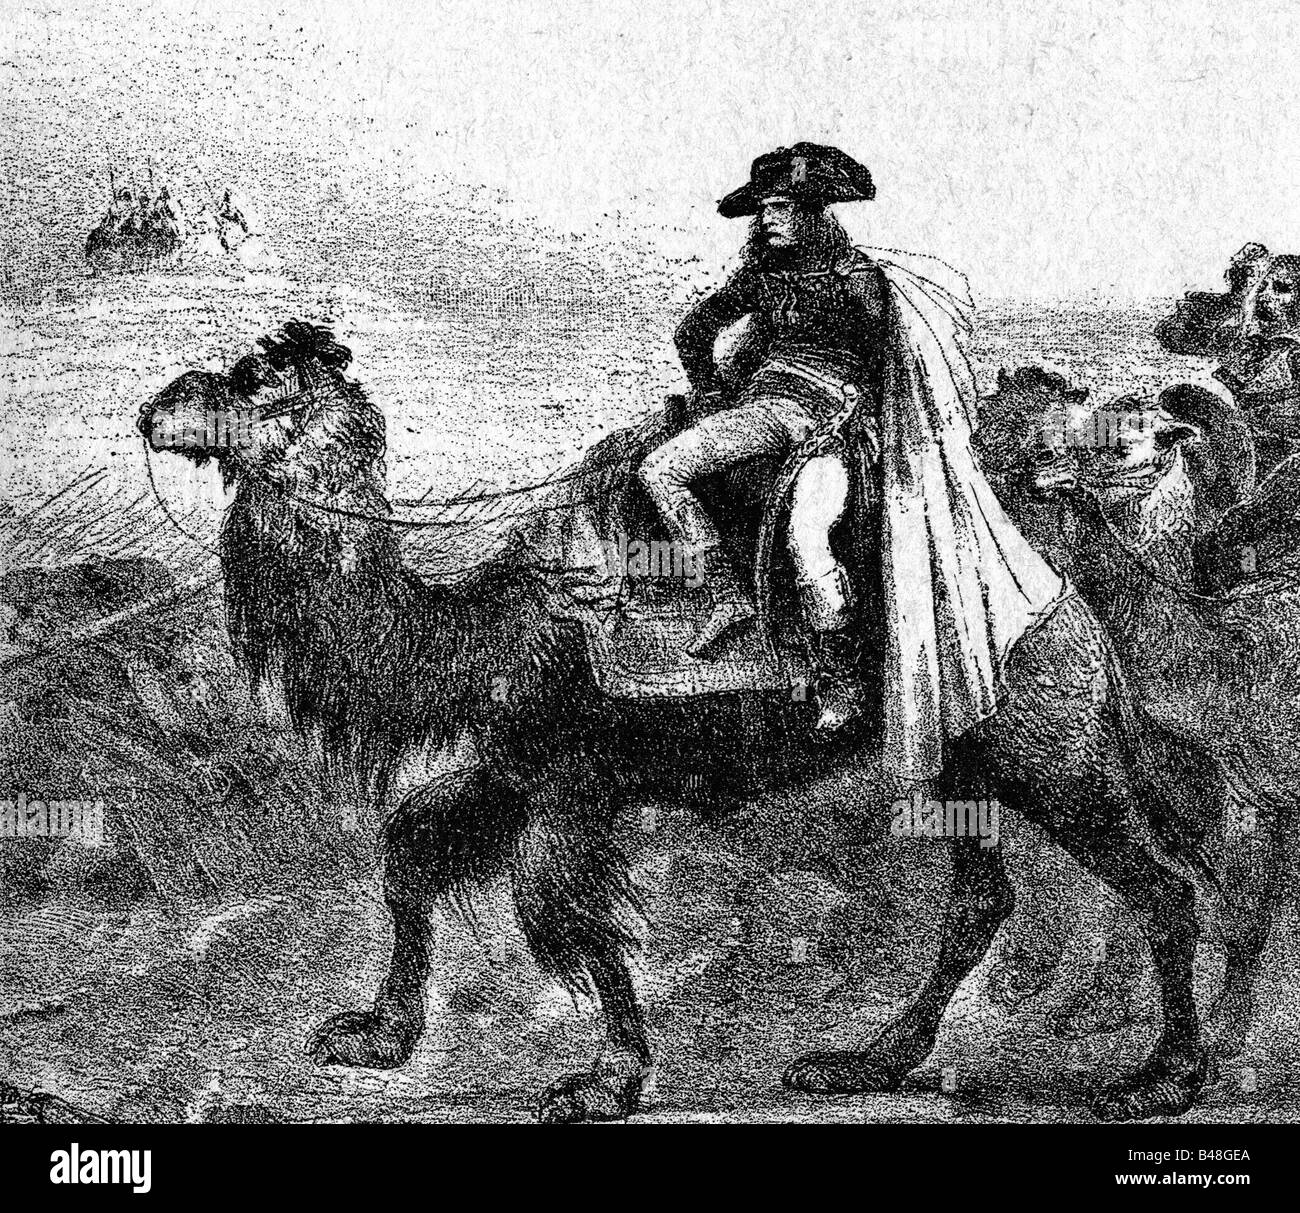 Napoleon I., 15.8.1769 - 5.5.1821, Emperor of the French 2.12.1804 - 22.6.1815, in Syria, riding a dromedary, engraving, 19th century, , Stock Photo